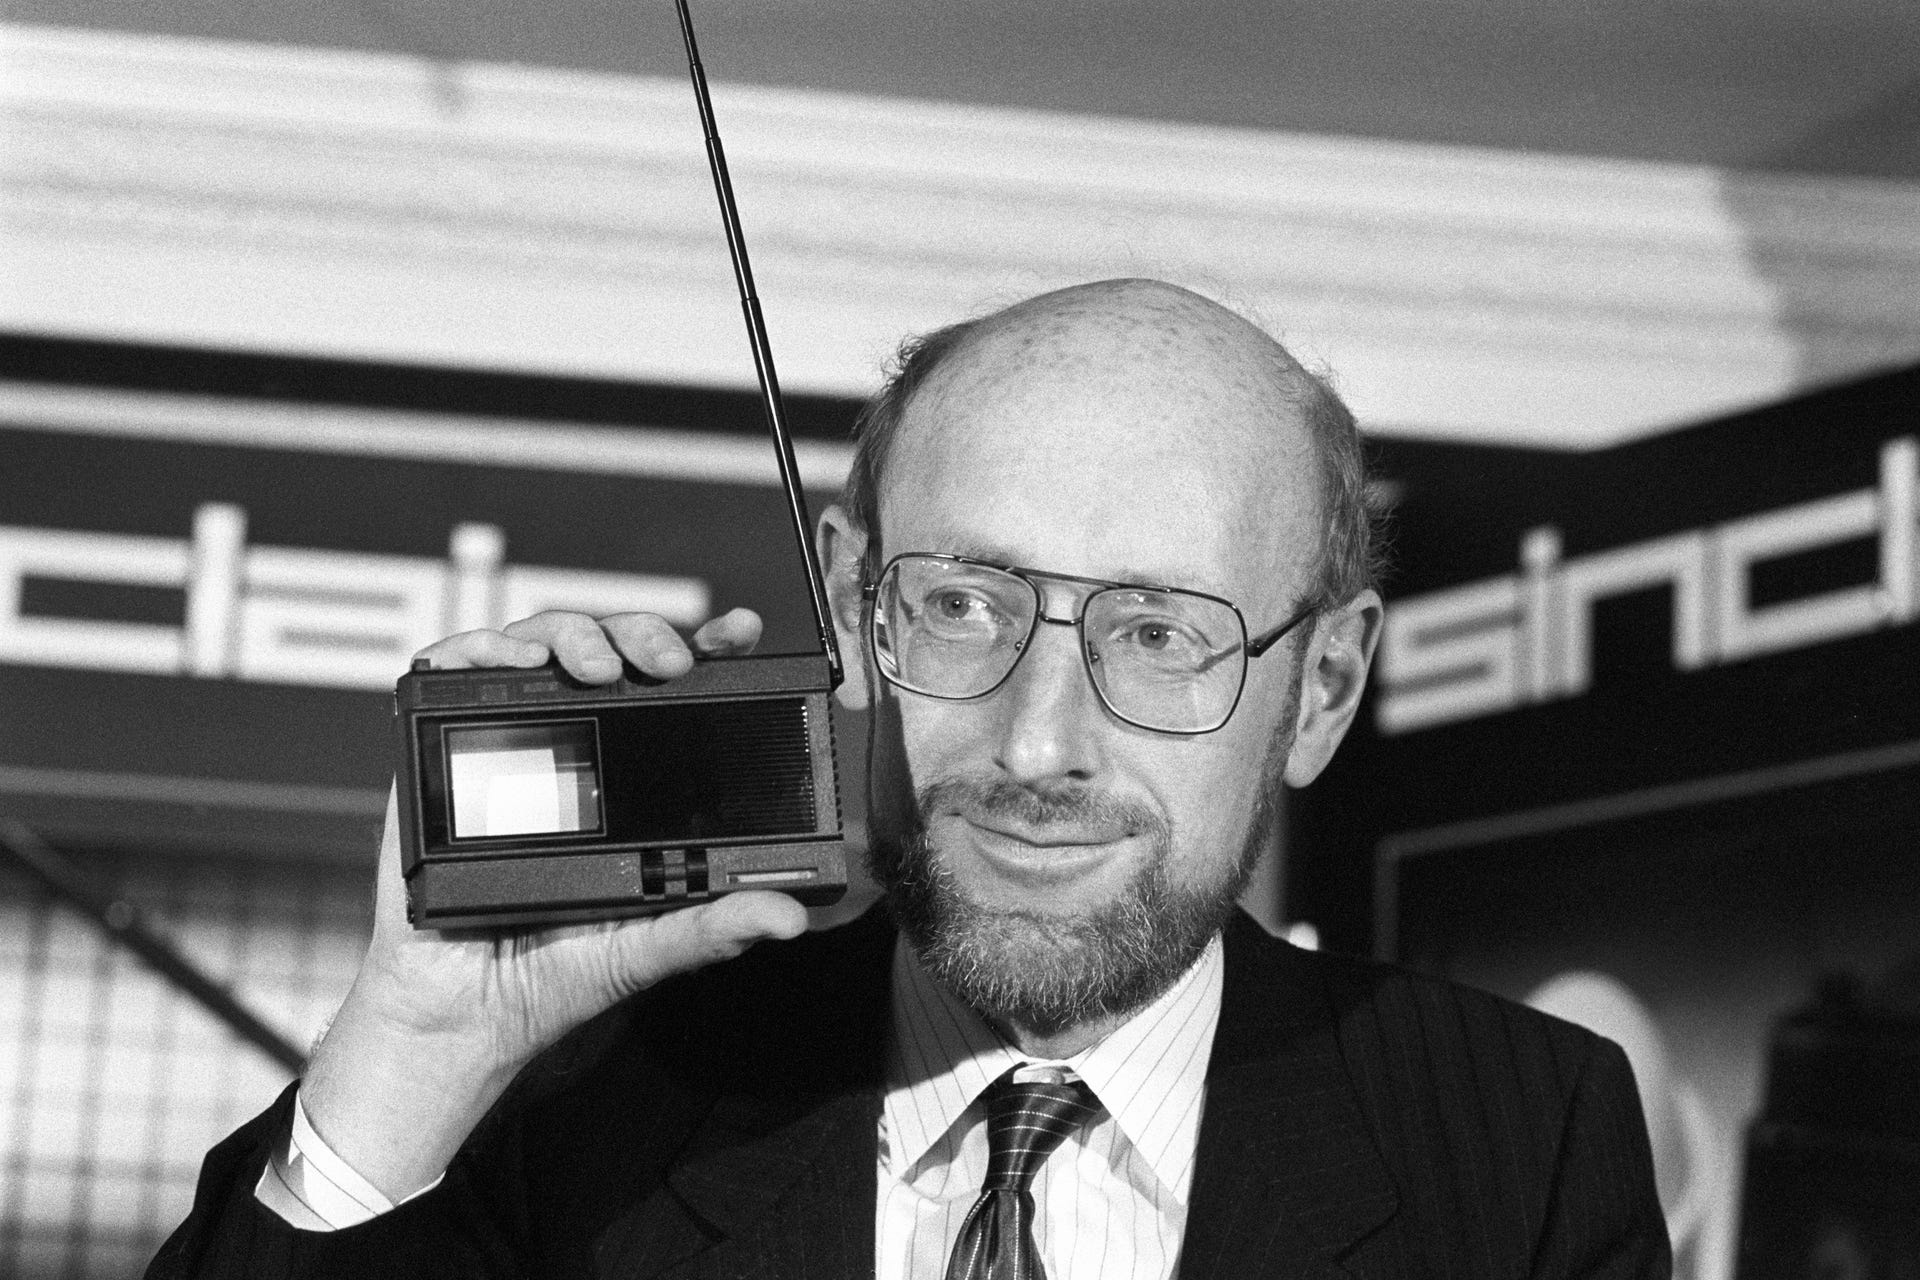 Clive Sinclair, founder and chairman of Sinclair Research, at the launch of the Sinclair 2-inch pocket television